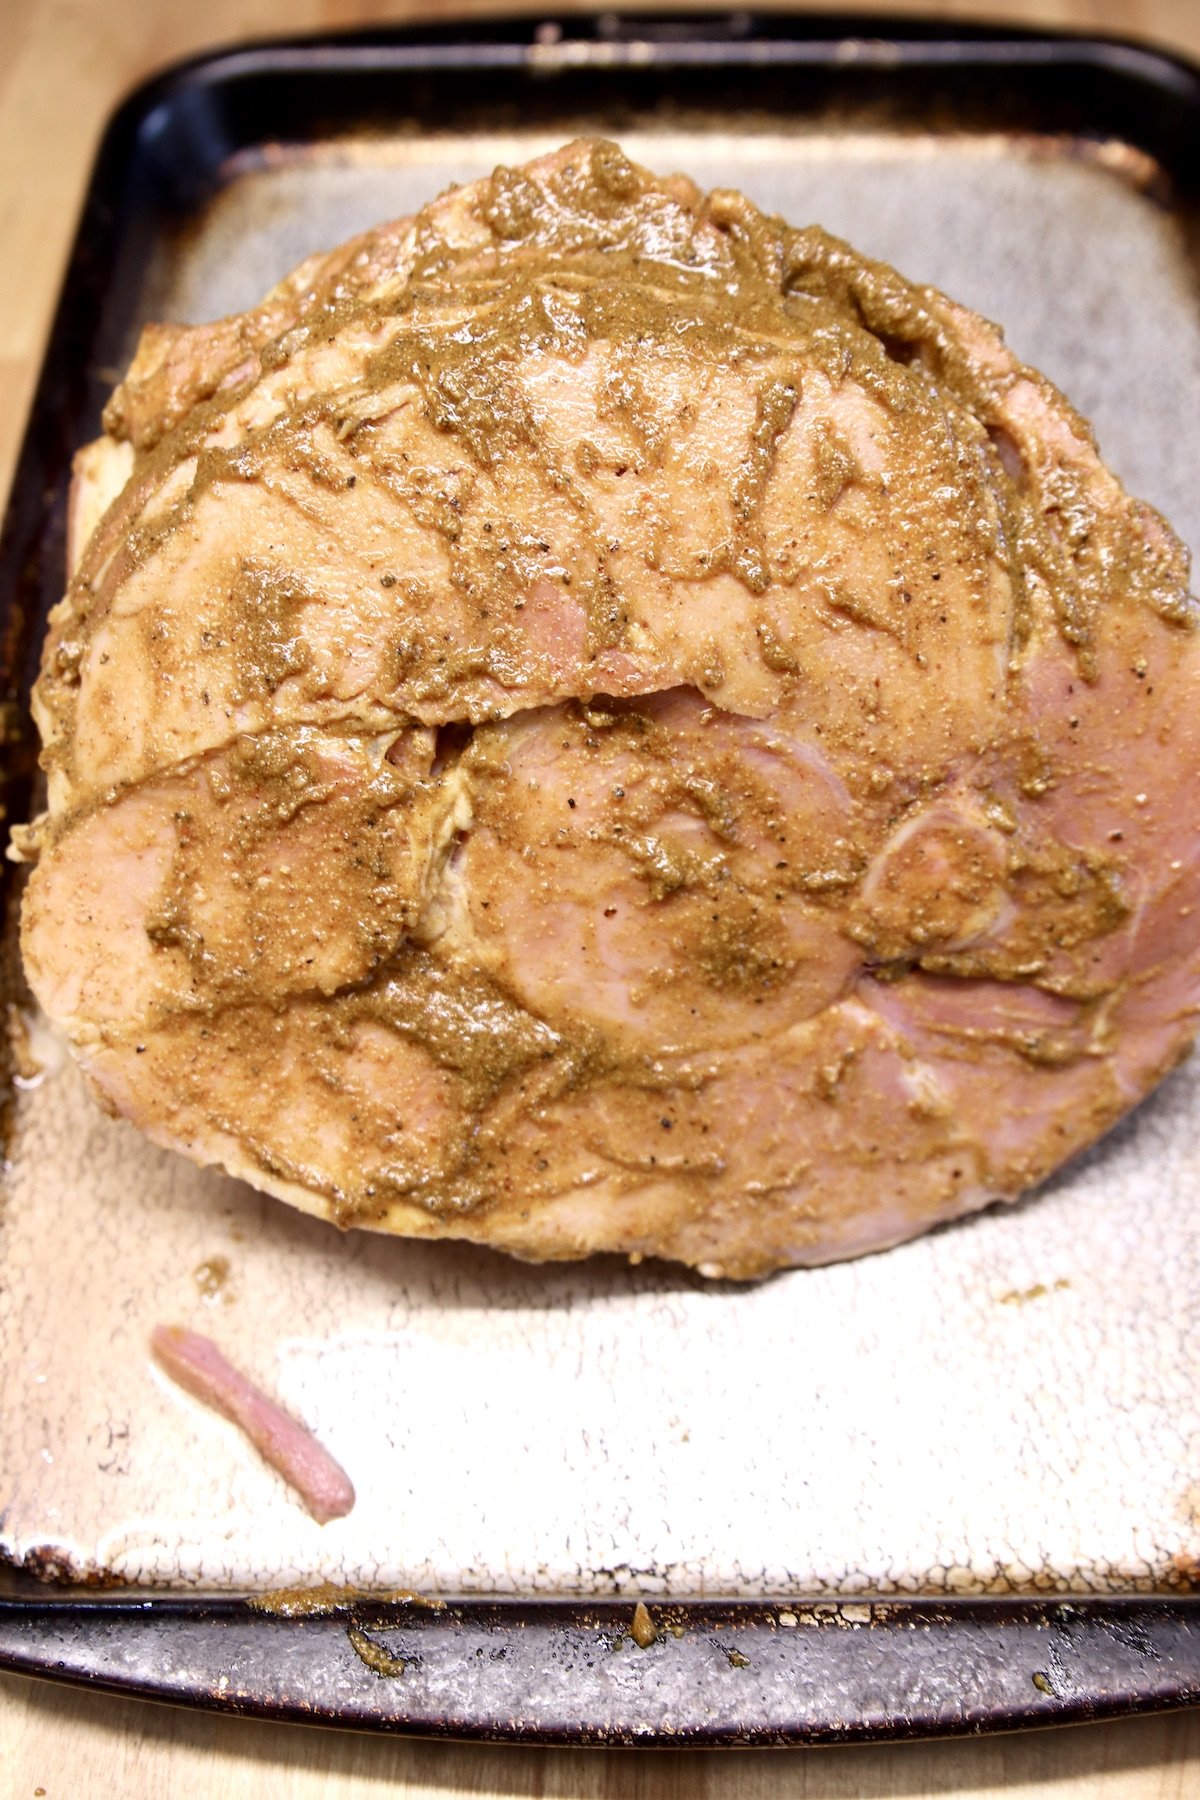 ham with mustard glaze before cooking